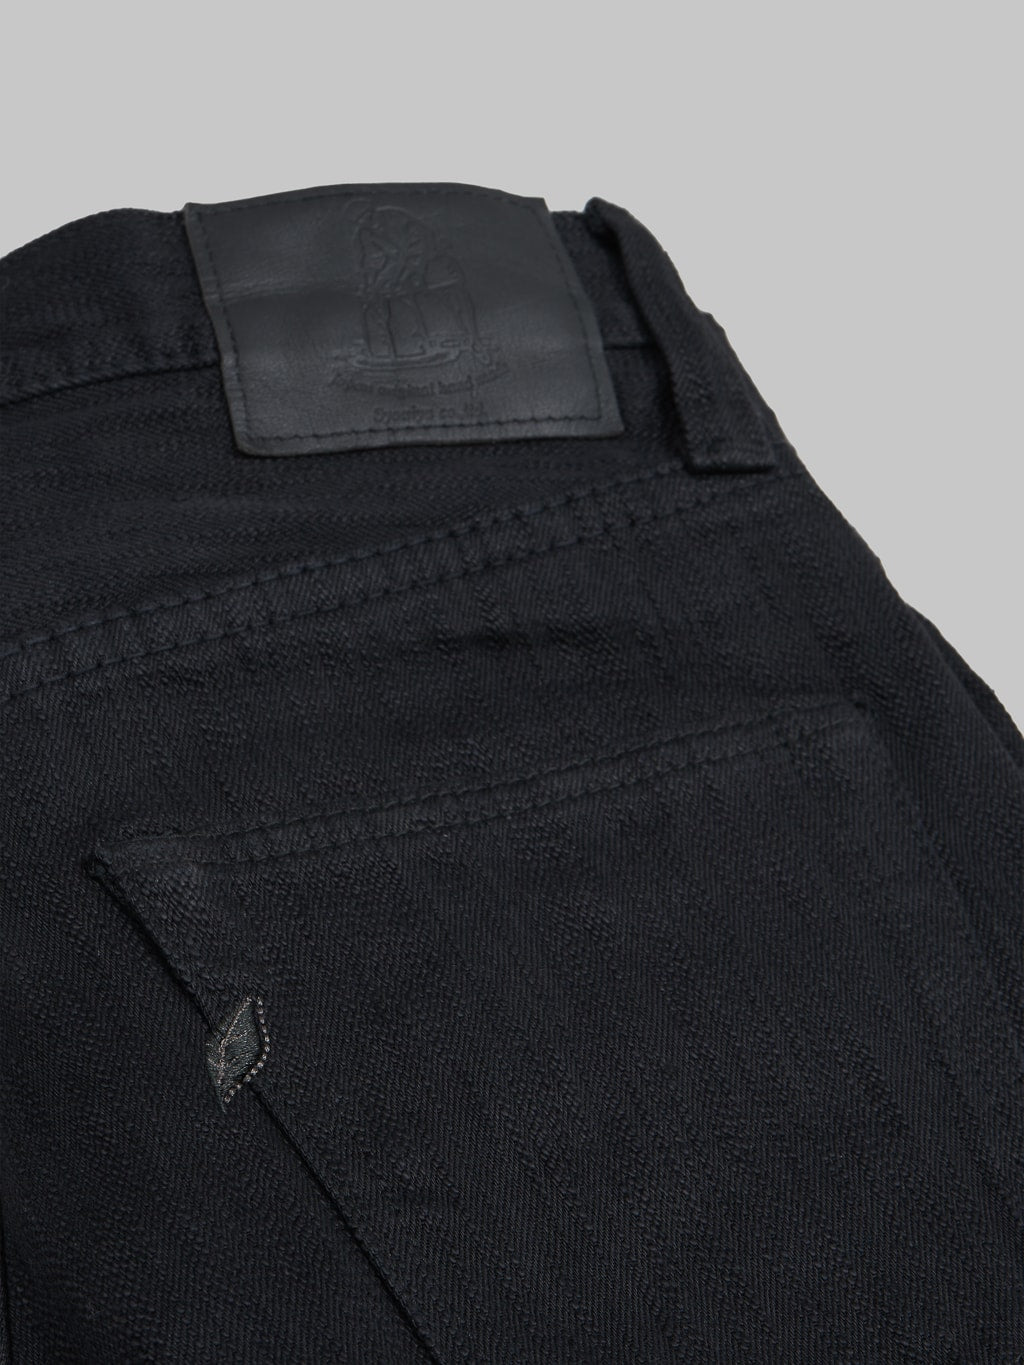 Pure Blue Japan 1167-WBK "Extra Slub Stretch" 13oz Double Black Relaxed Tapered Jeans